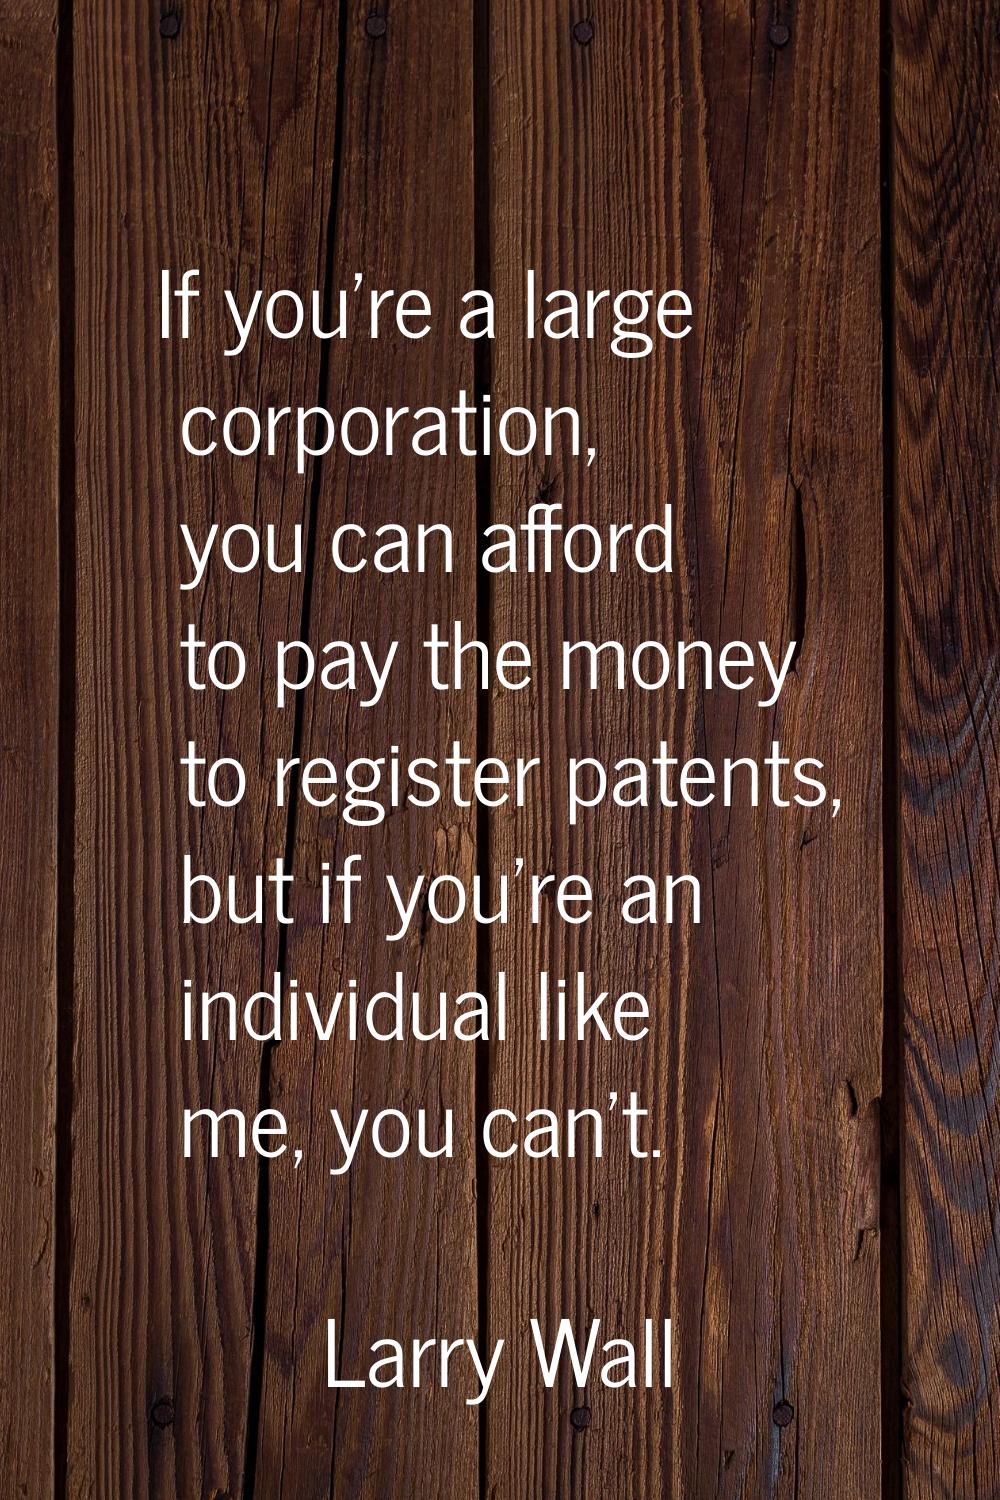 If you're a large corporation, you can afford to pay the money to register patents, but if you're a